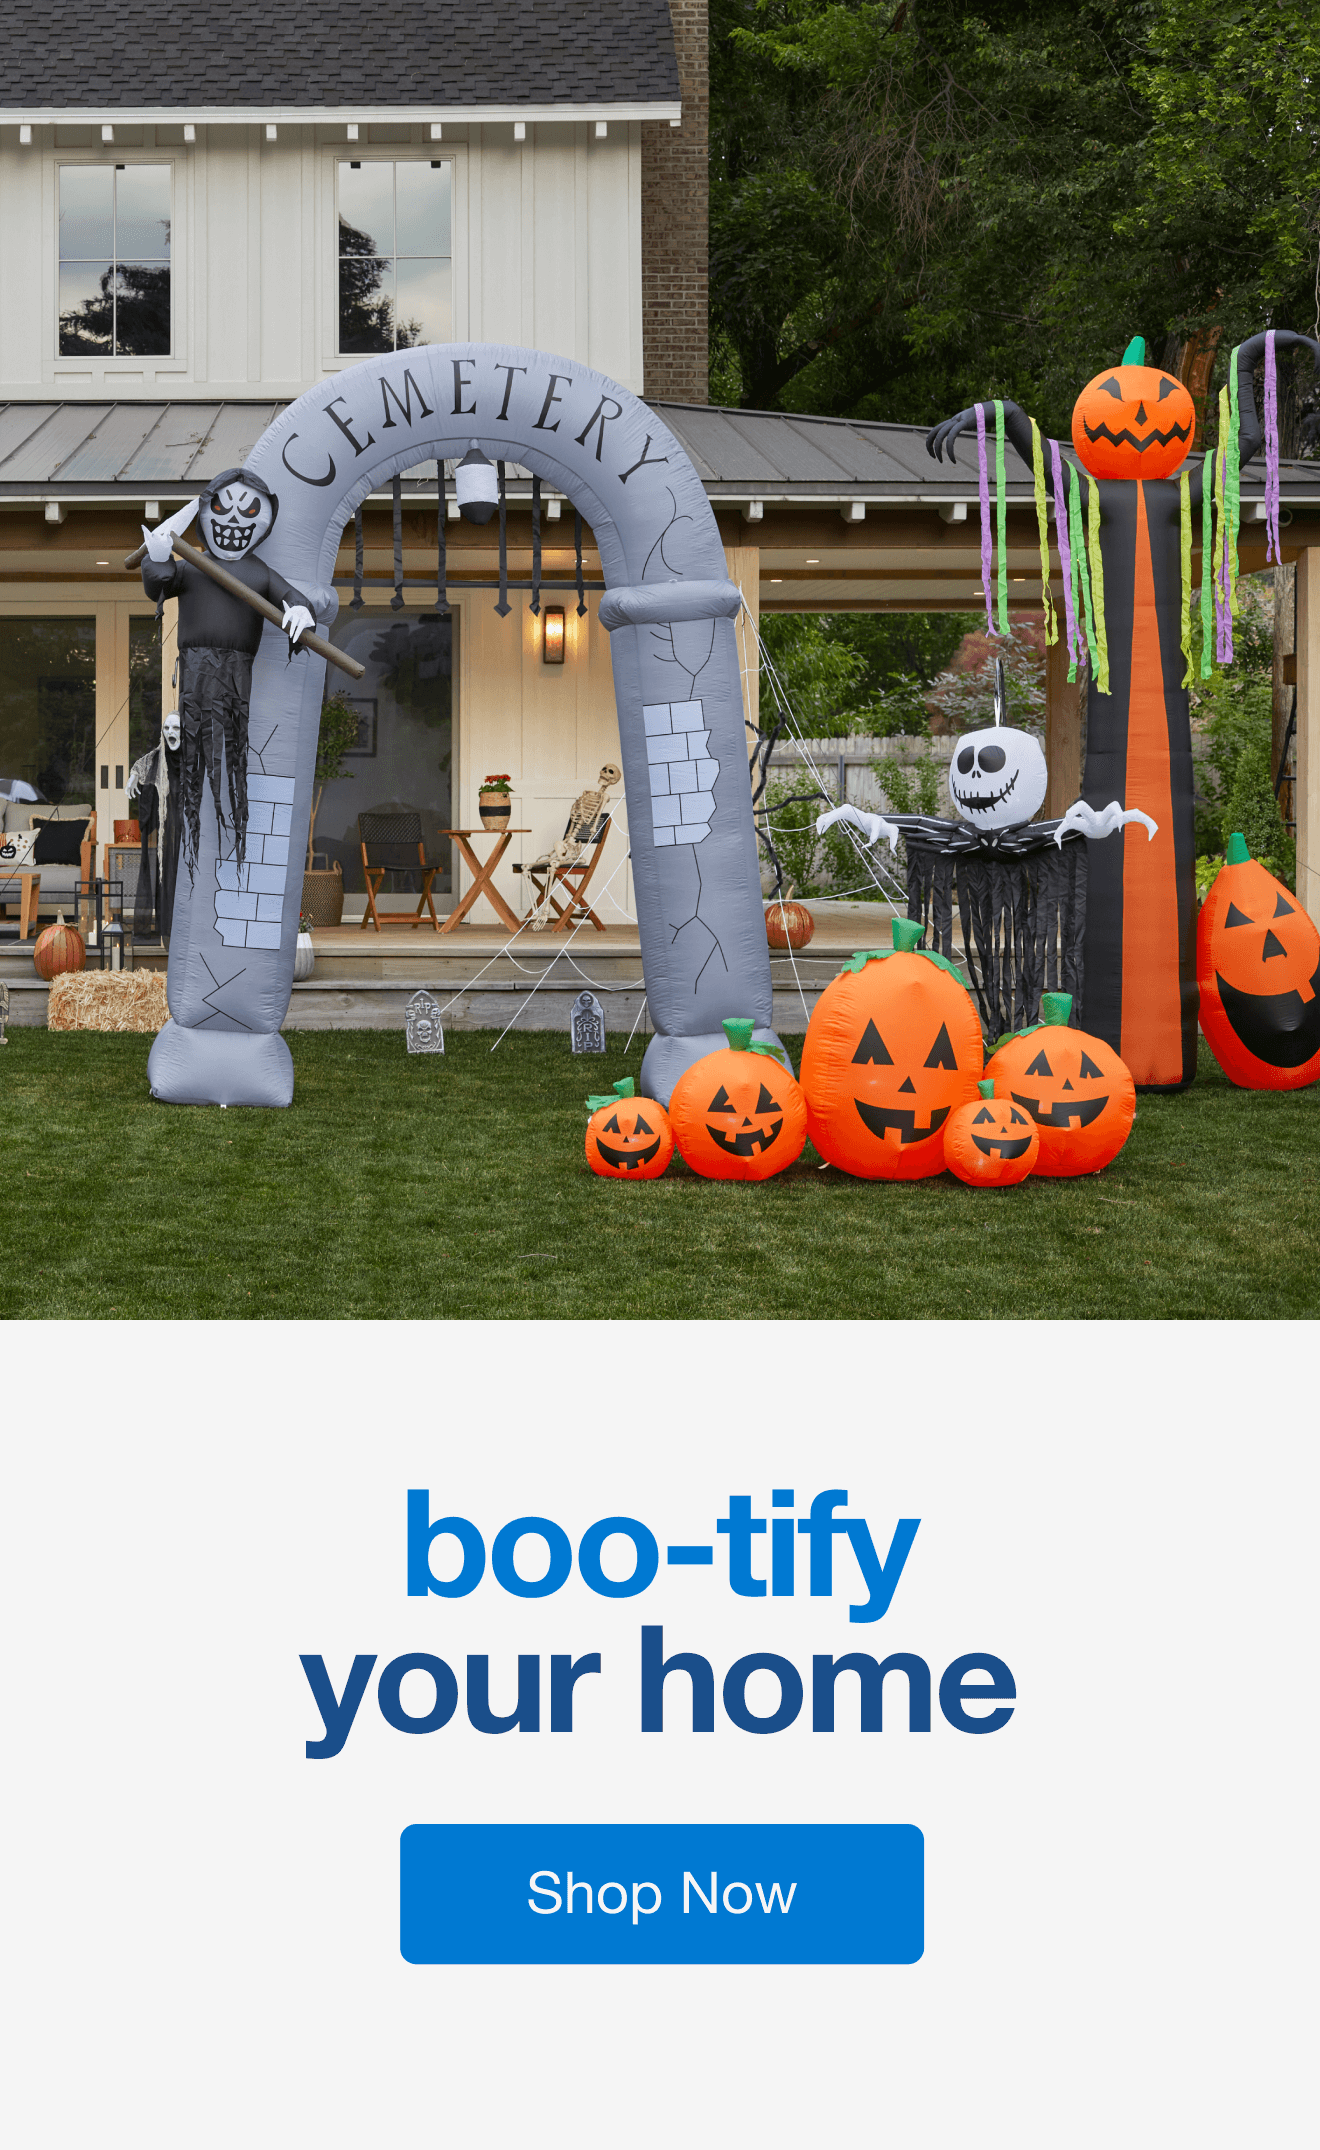 boo-tify your home. shop now